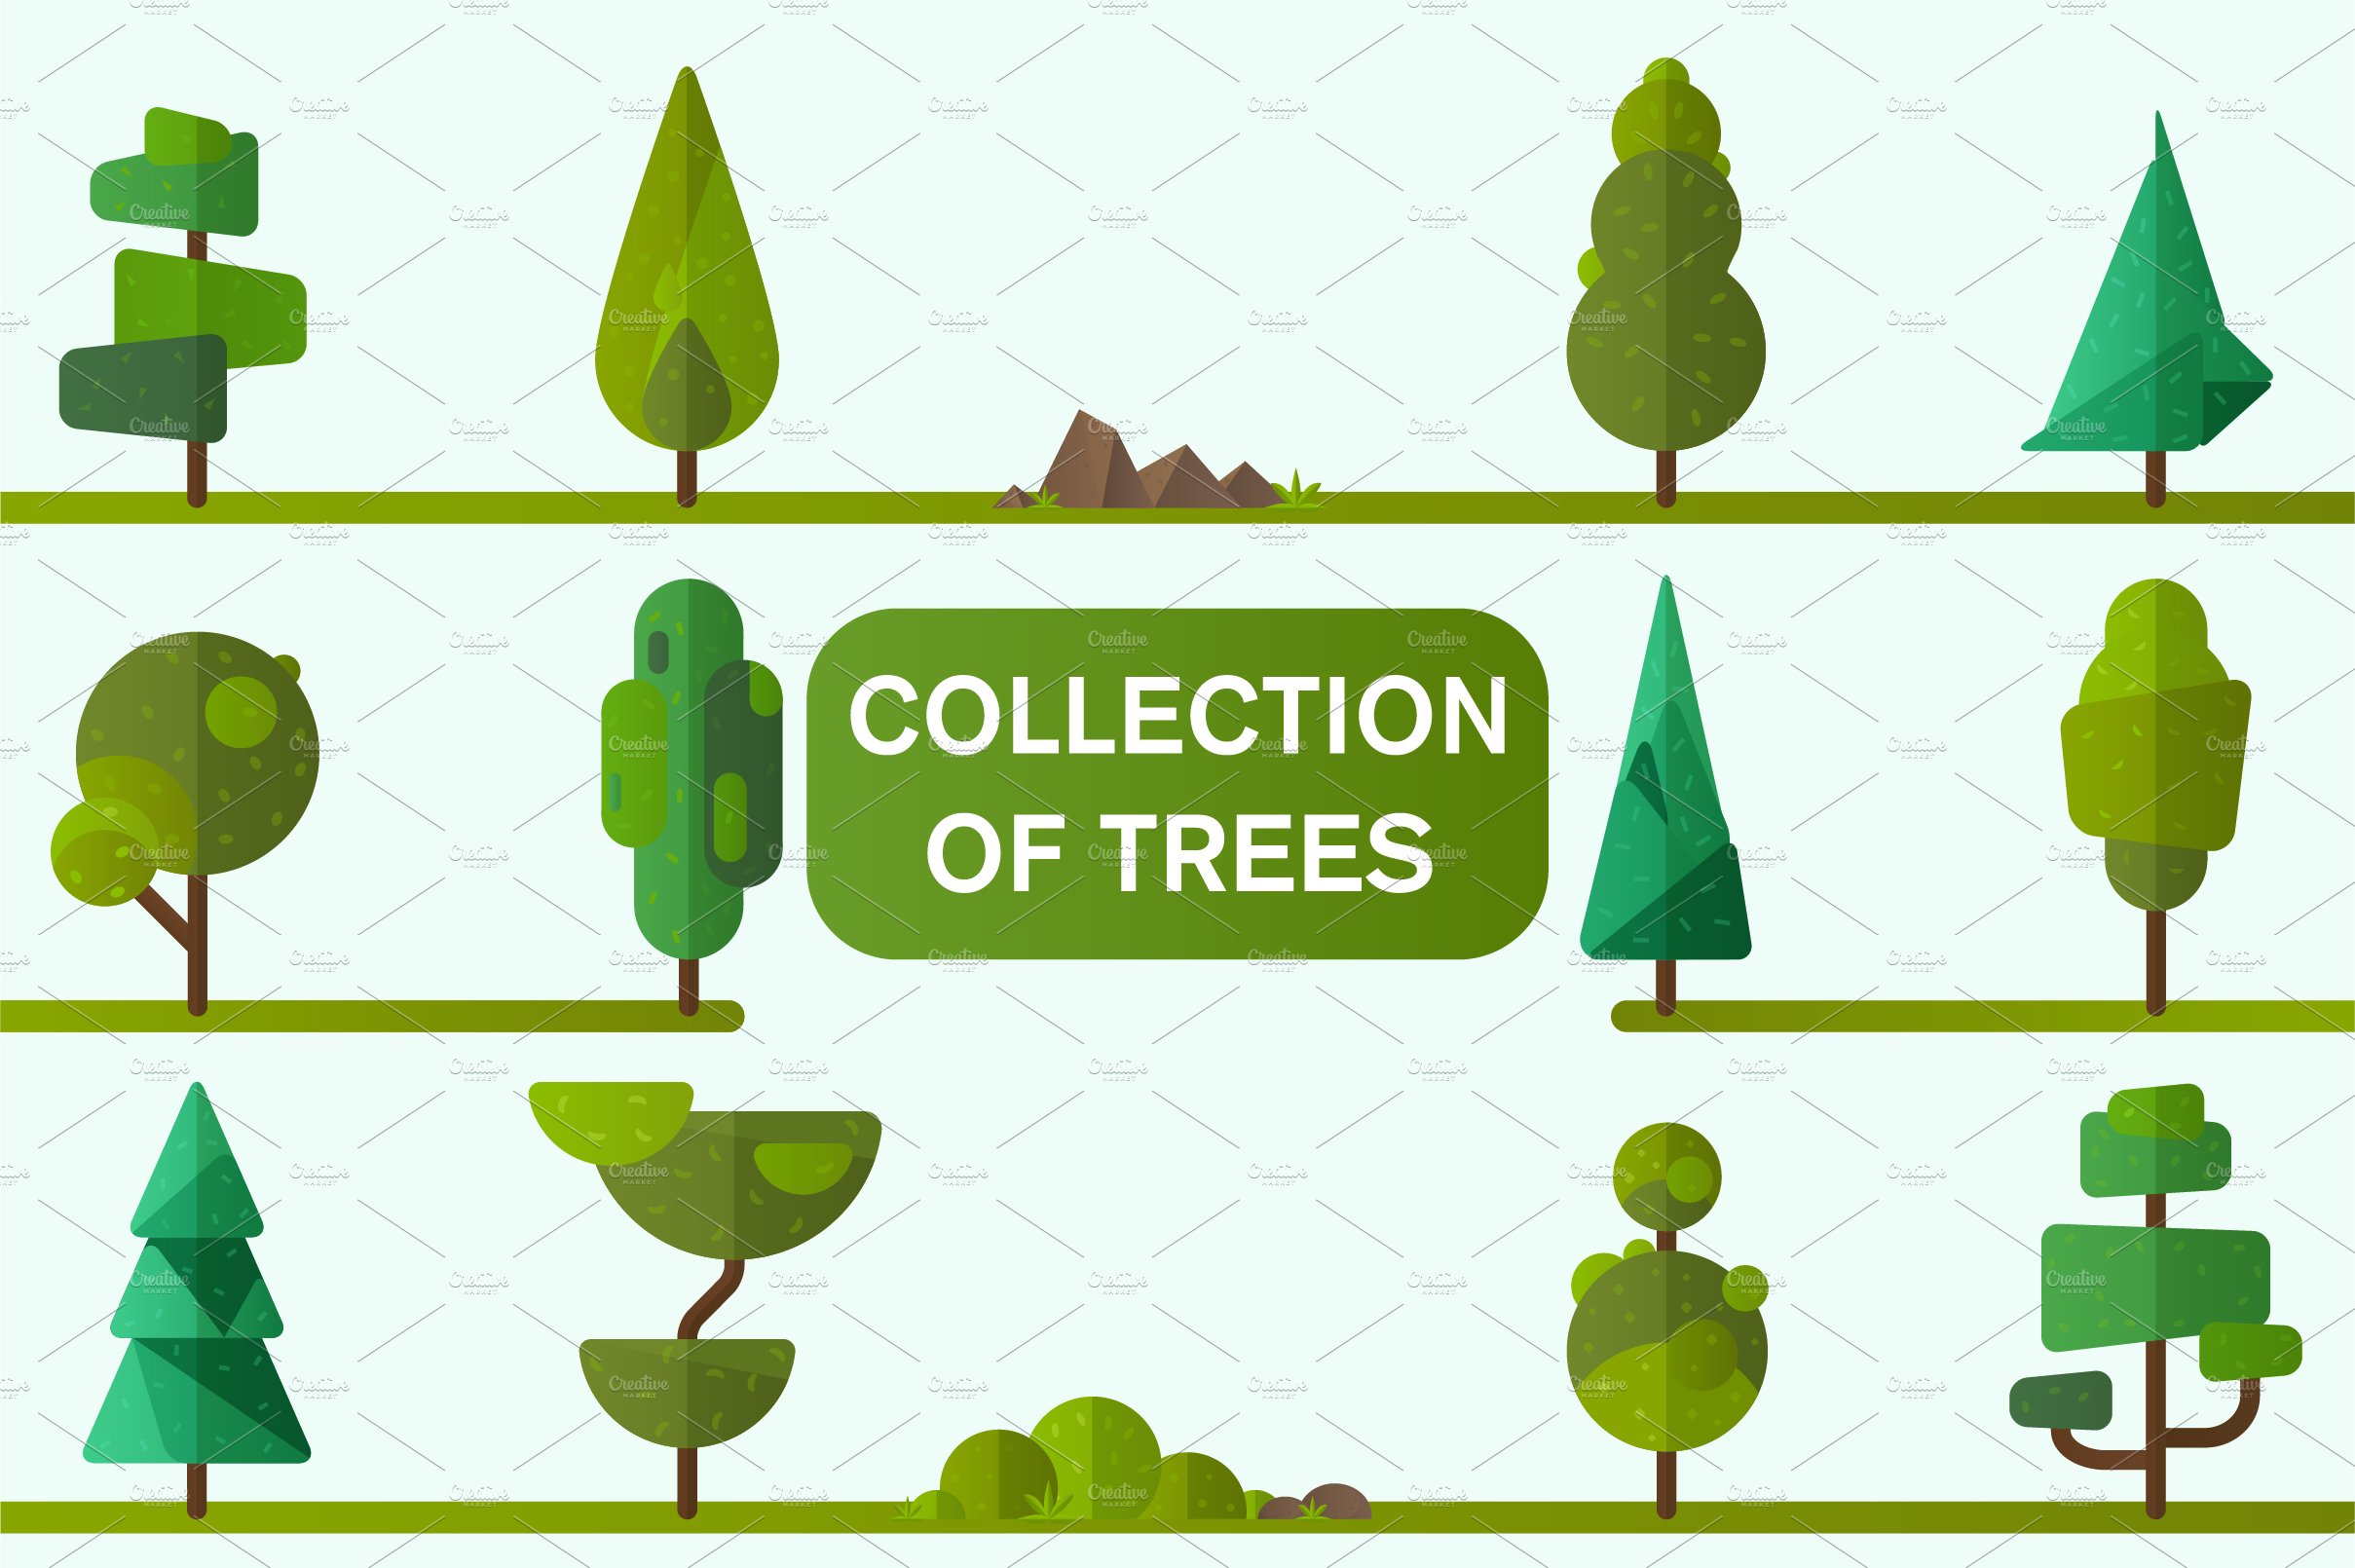 Collection of geometric trees cover image.